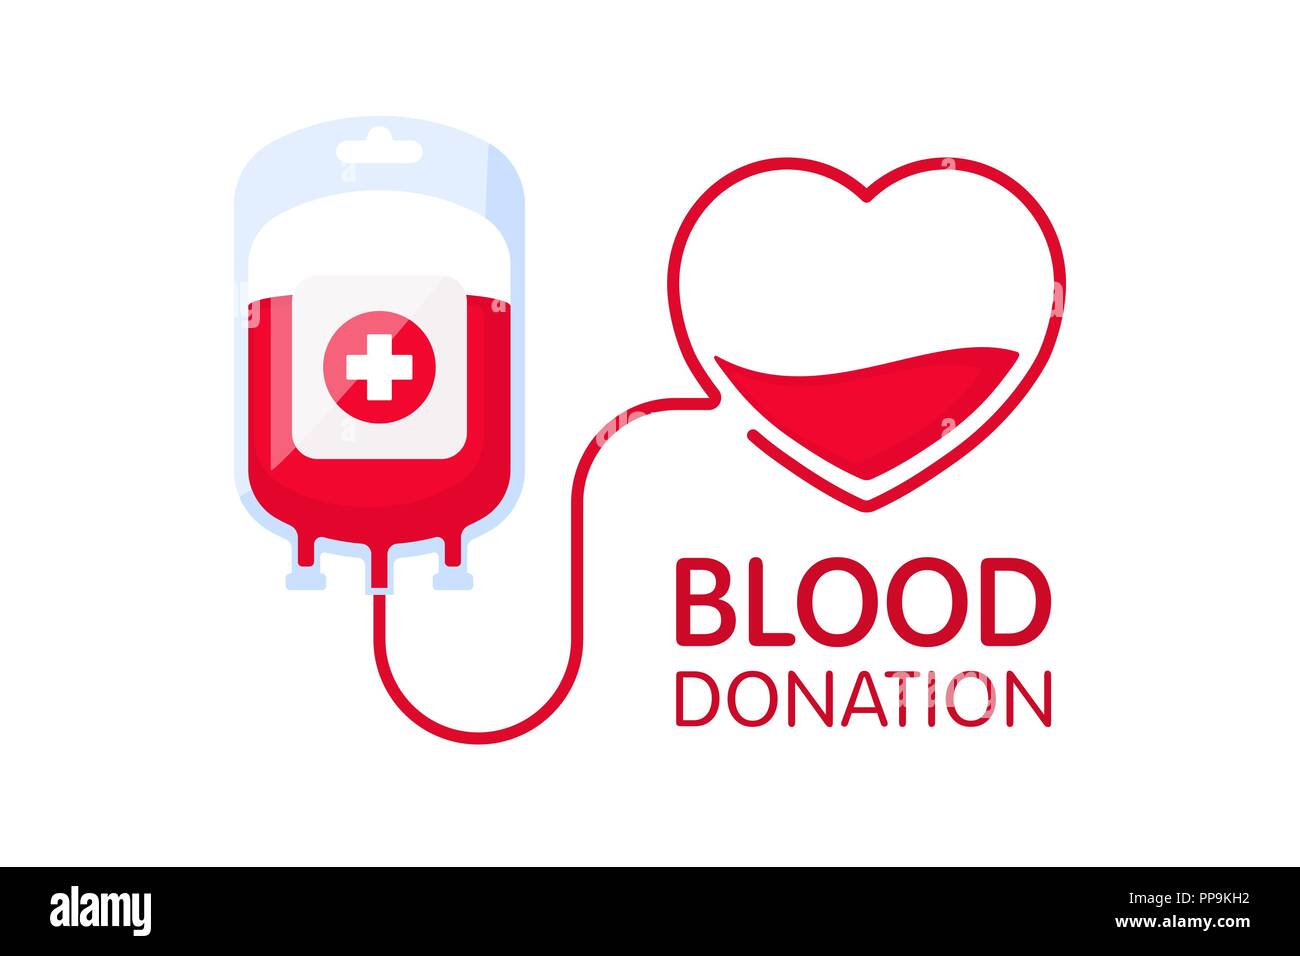 Donate blood concept with blood bag and heart. Blood donation vector illustration isolated on white background. World blood donor day - June 14. Stock Vector